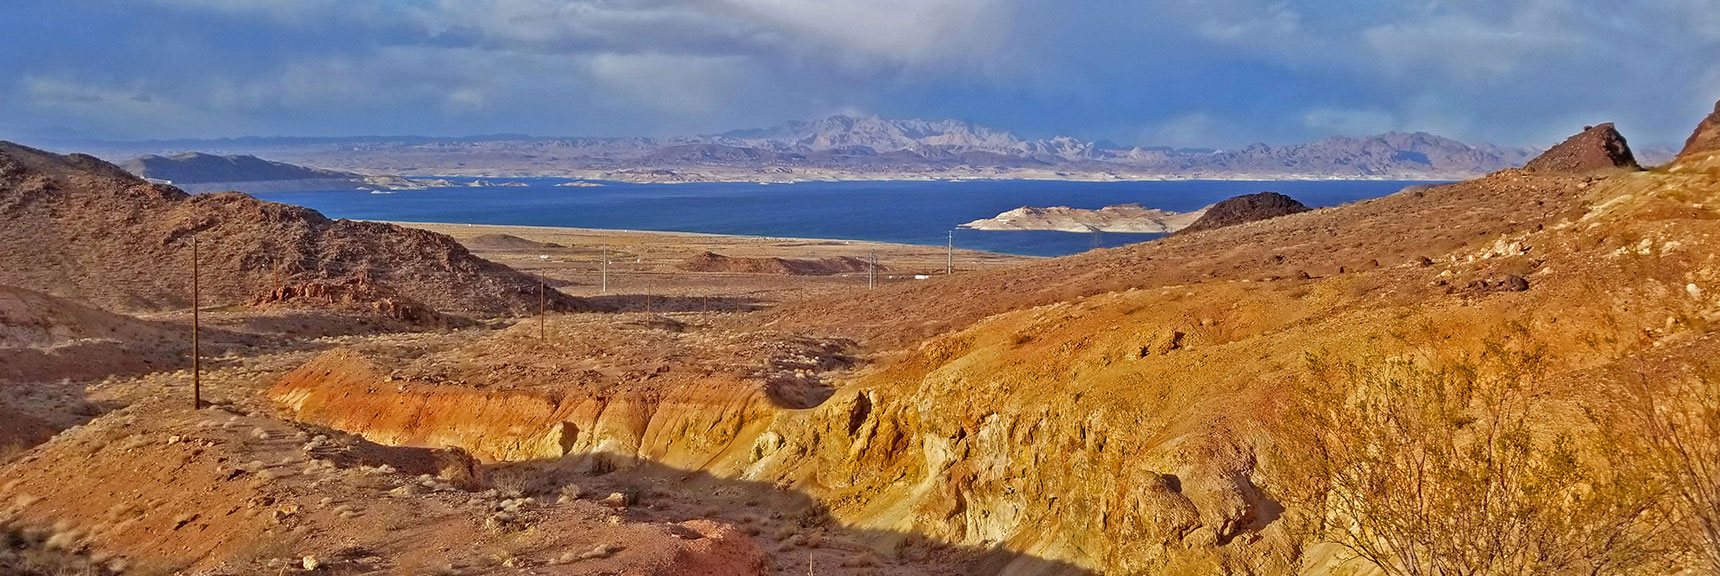 Nearing Trailhead Parking, Late Afternoon View Across Lake Mead | Historic Railroad Trail | Lake Mead National Recreation Area, Nevada